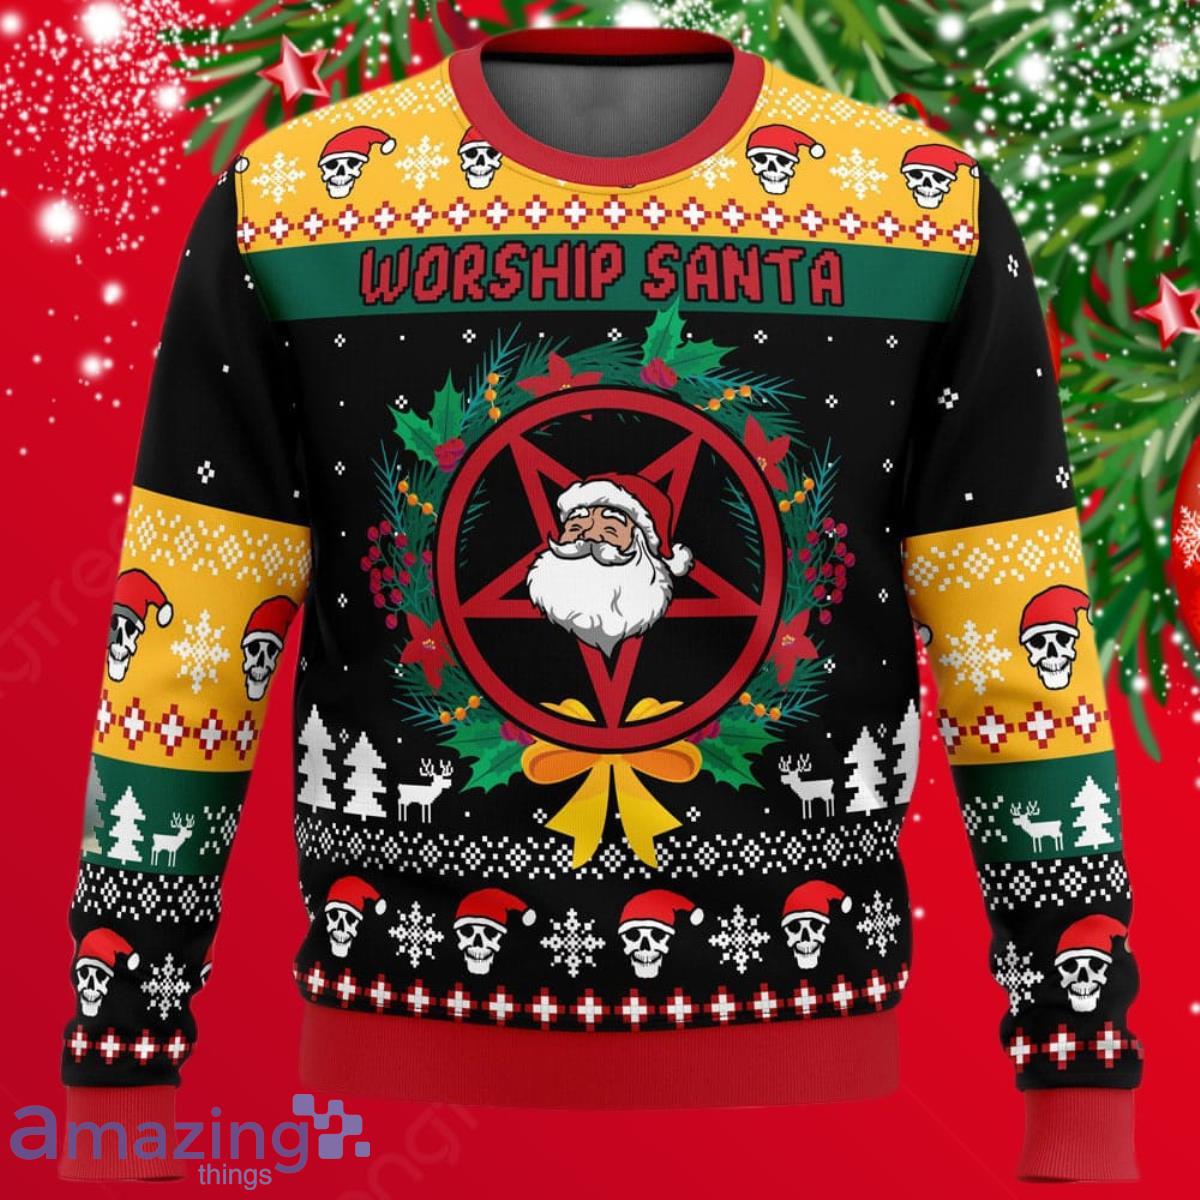 Worship Santa Ugly Christmas Sweater Impressive Gift For Men And Women Product Photo 1